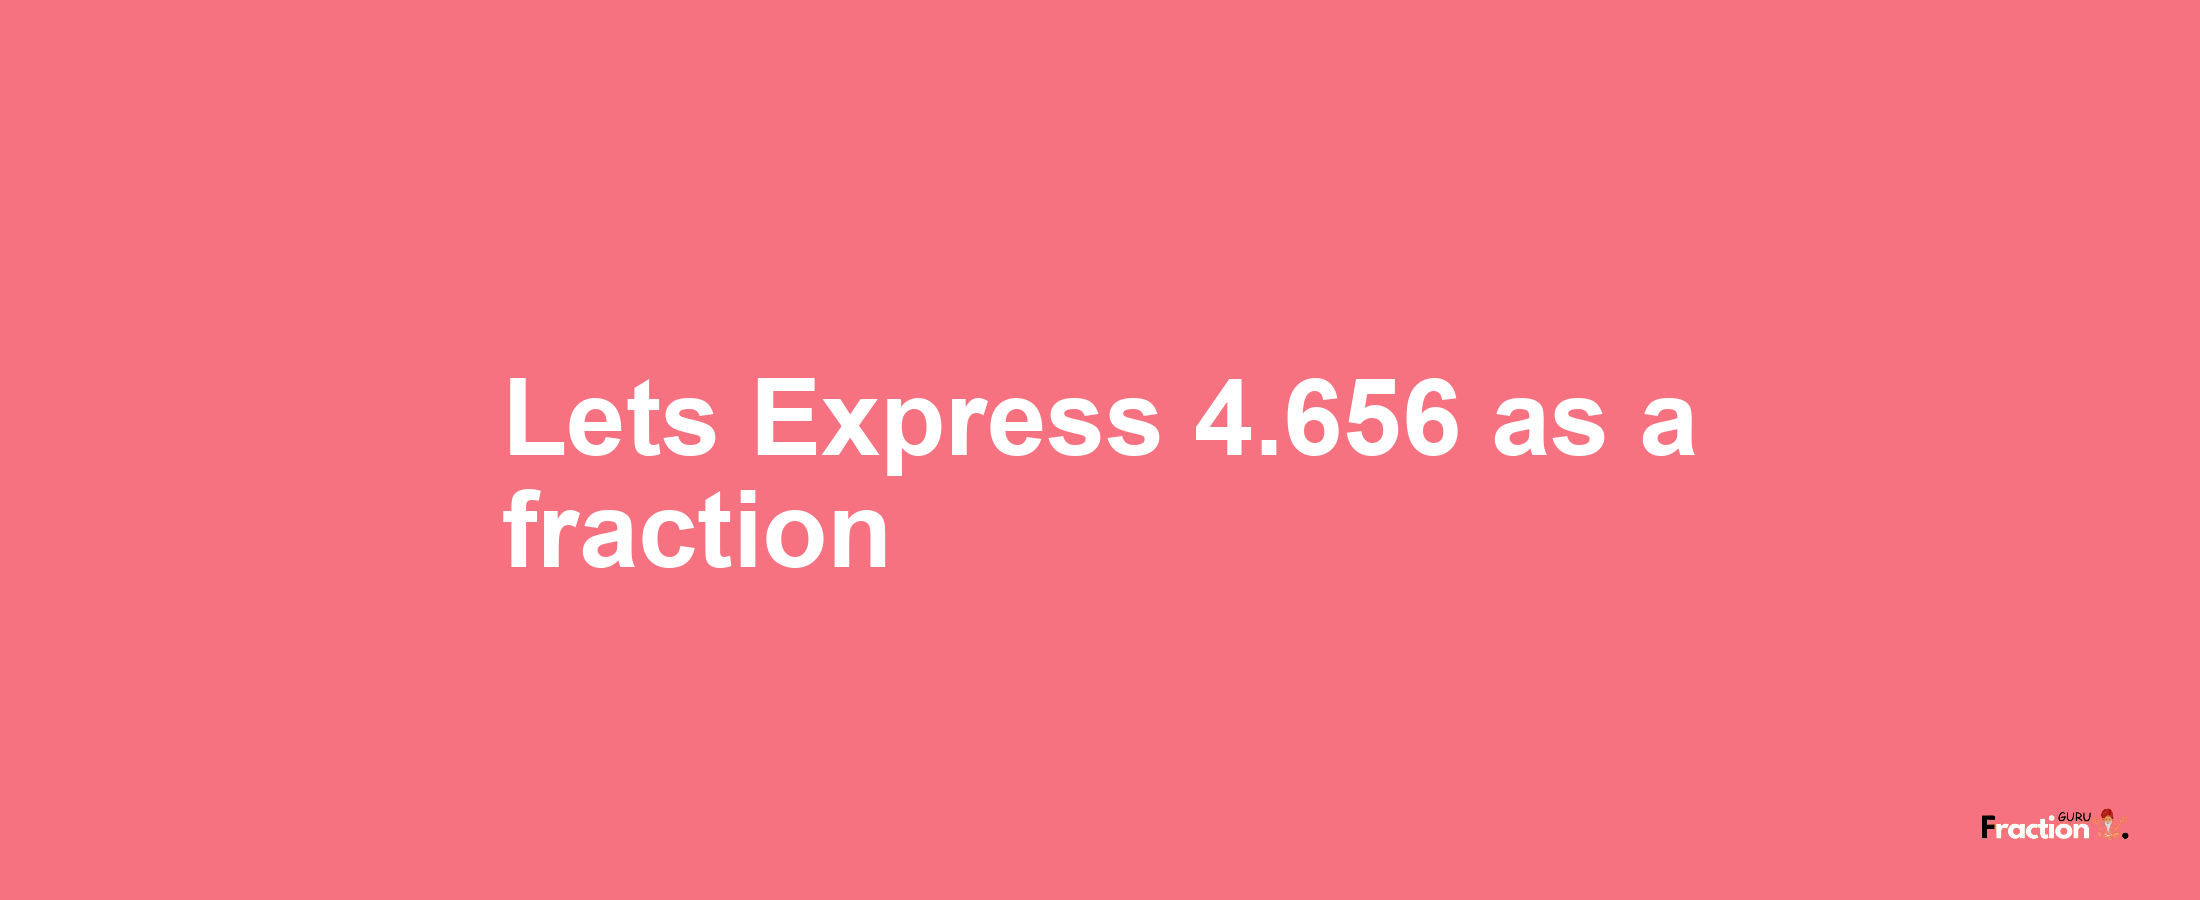 Lets Express 4.656 as afraction